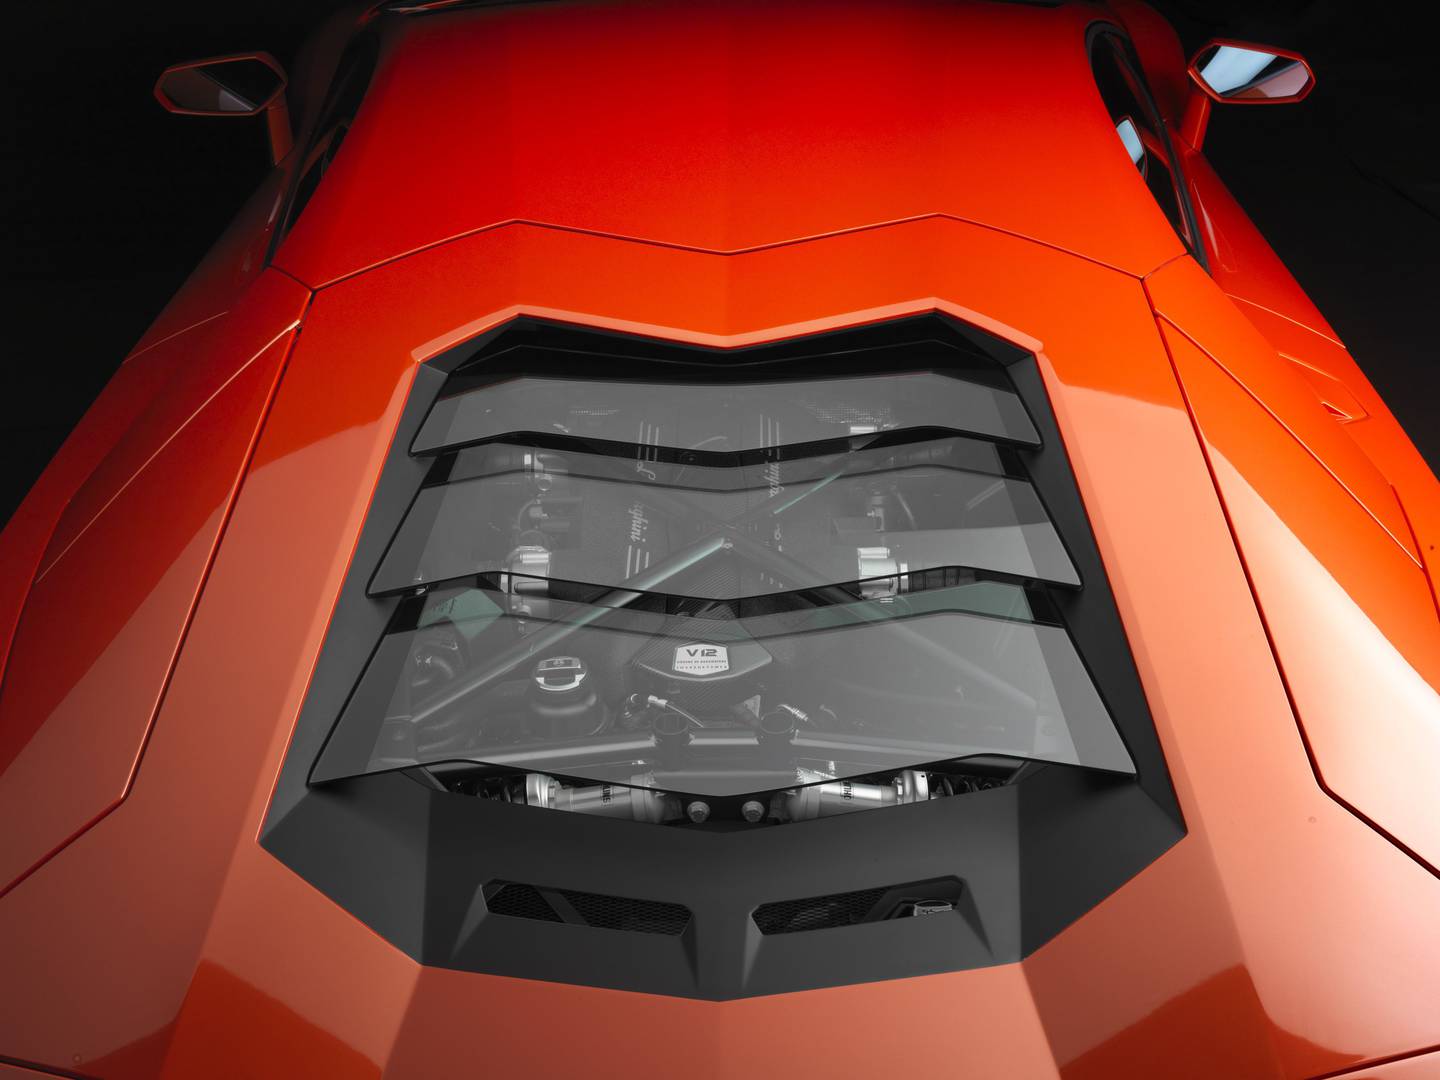 The 2012 Lamborghini Aventador LP700-4 has a V-12 engine with 691 horsepower, and rockets to 60 mph in 2.8 seconds.dfd